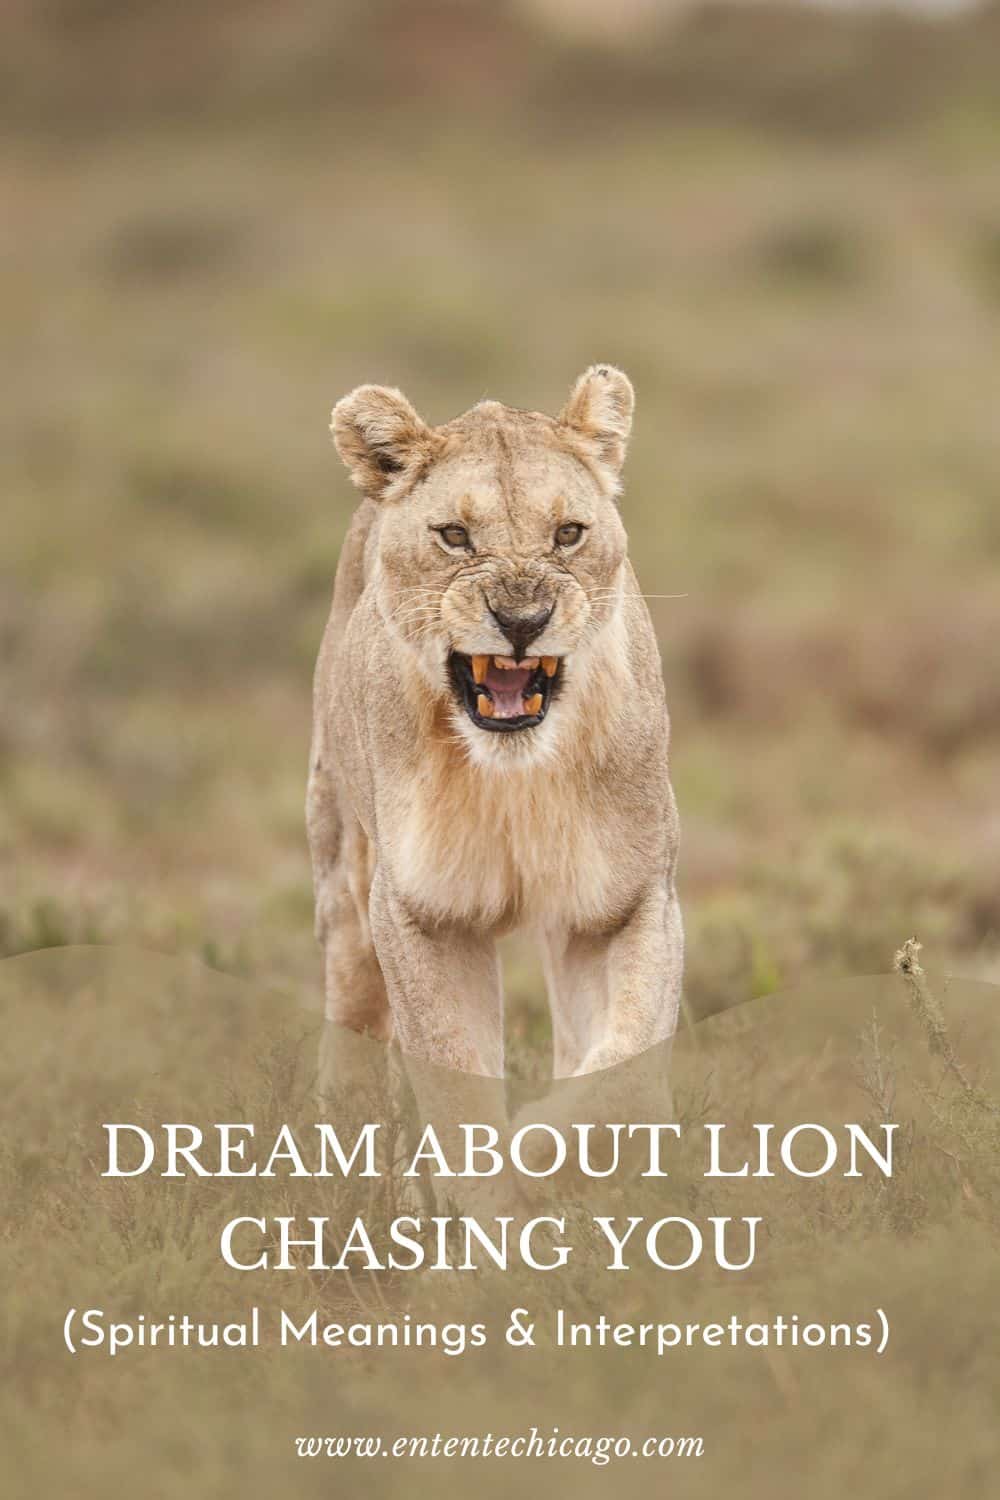 Dream About Lion Chasing You (Spiritual Meanings & Interpretations)